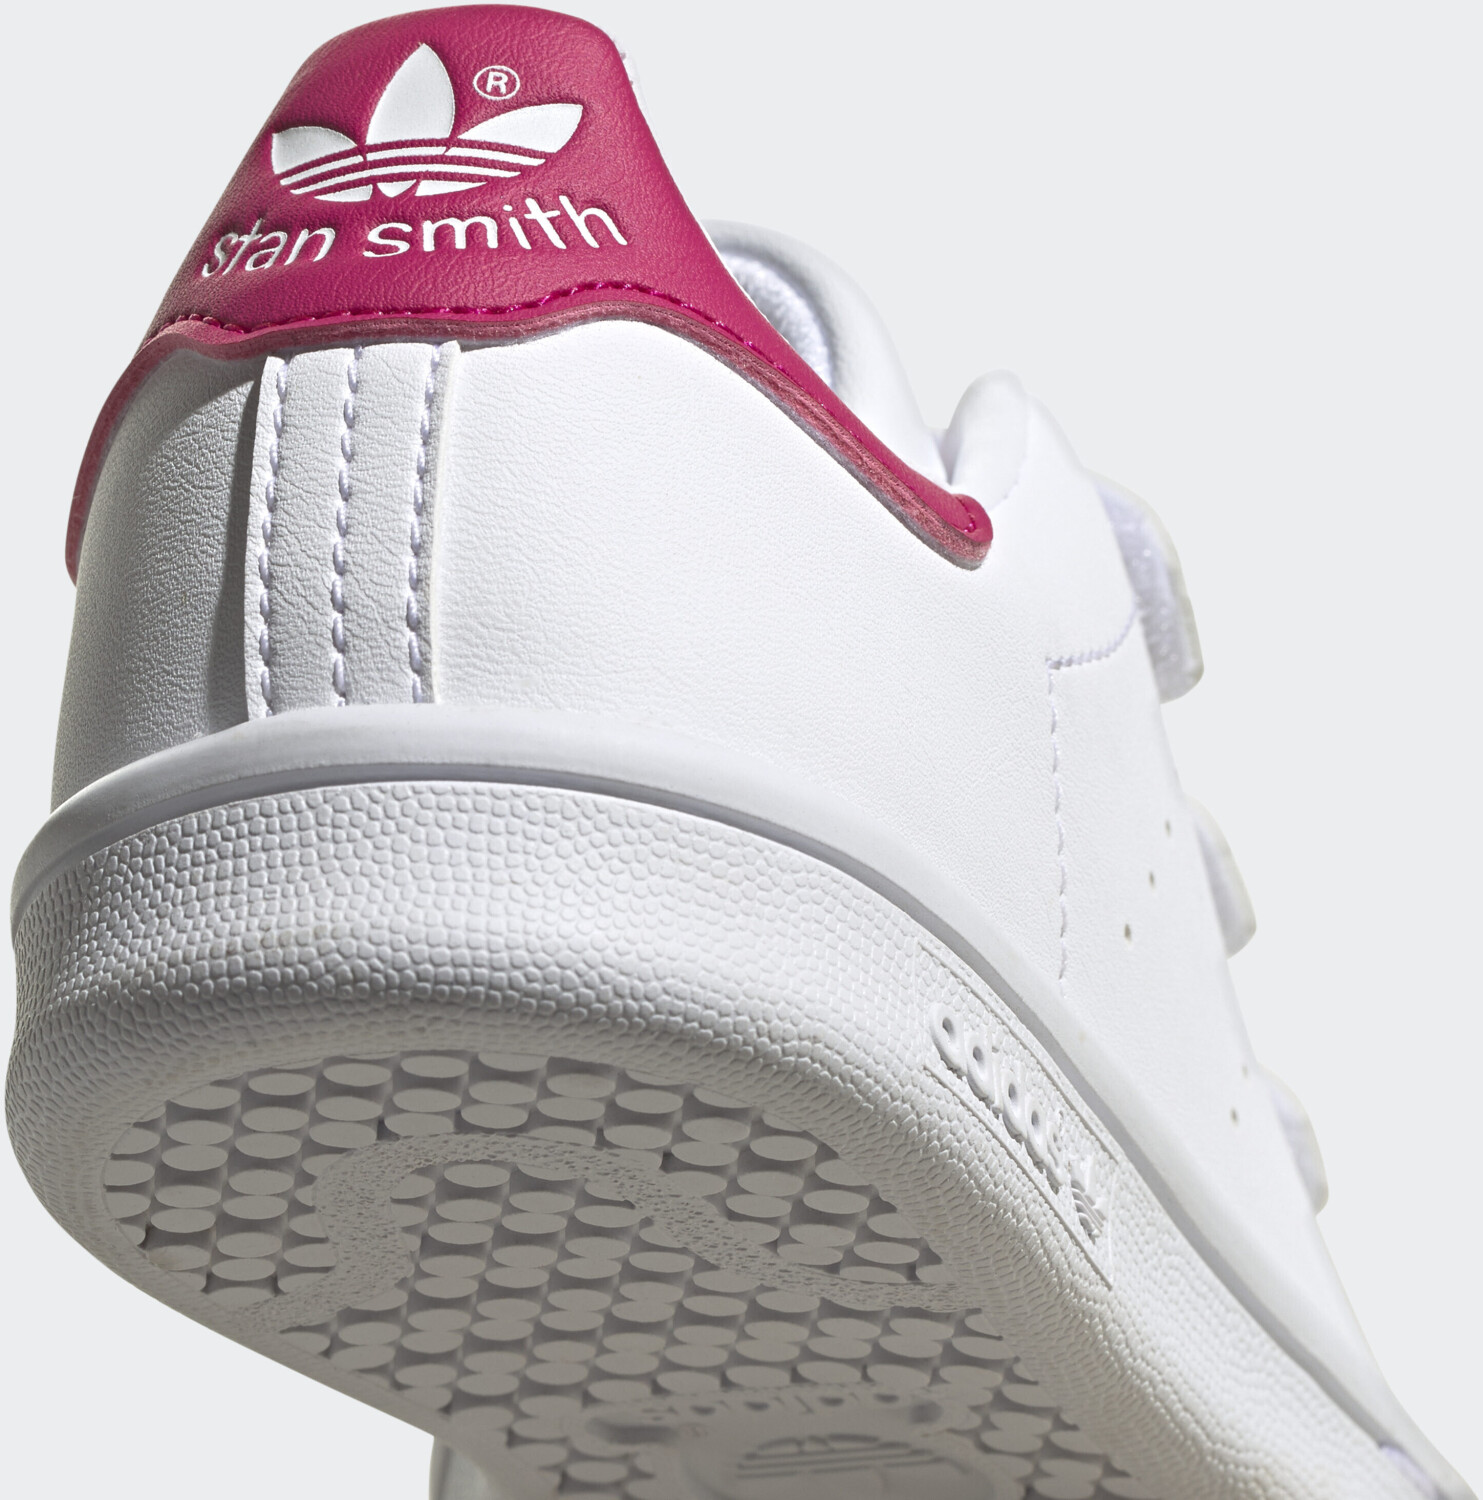 £32.50 Buy Stan Deals Adidas White/Cloud Smith Cloud White/Bold from on Kinder Best (Today) Pink –